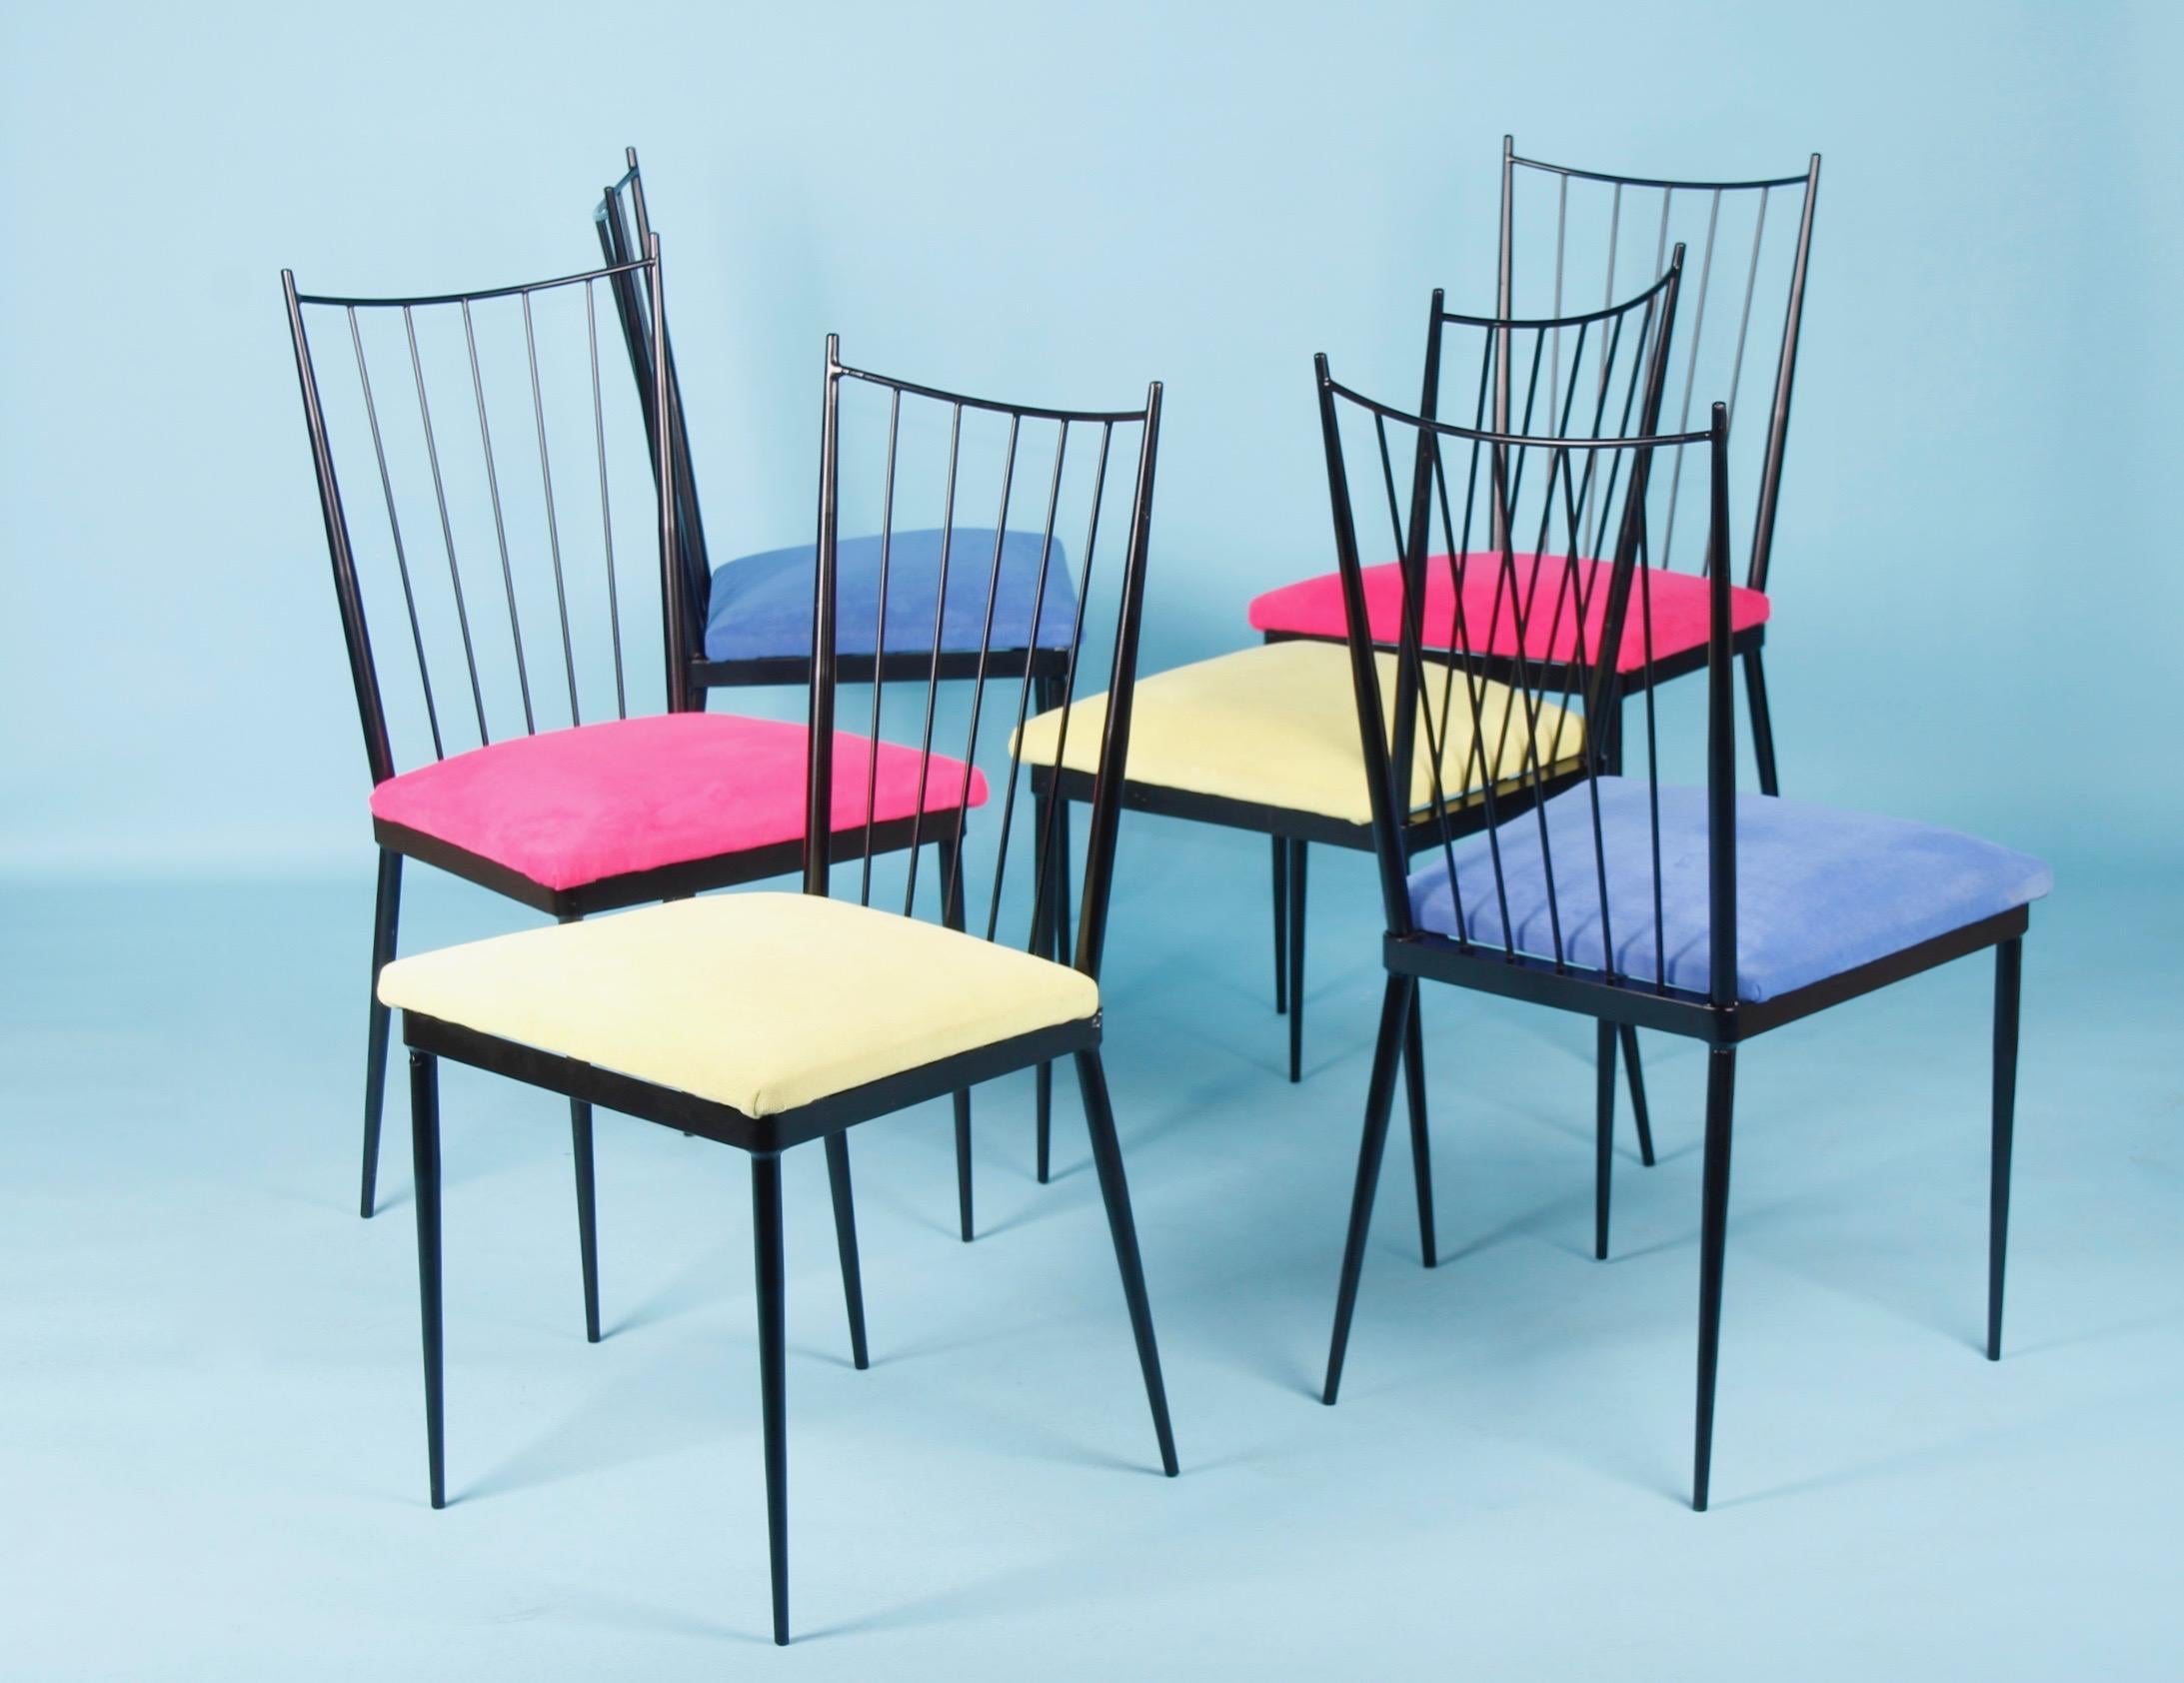 Set of six chairs by Colette Gueden, France, 1950s.